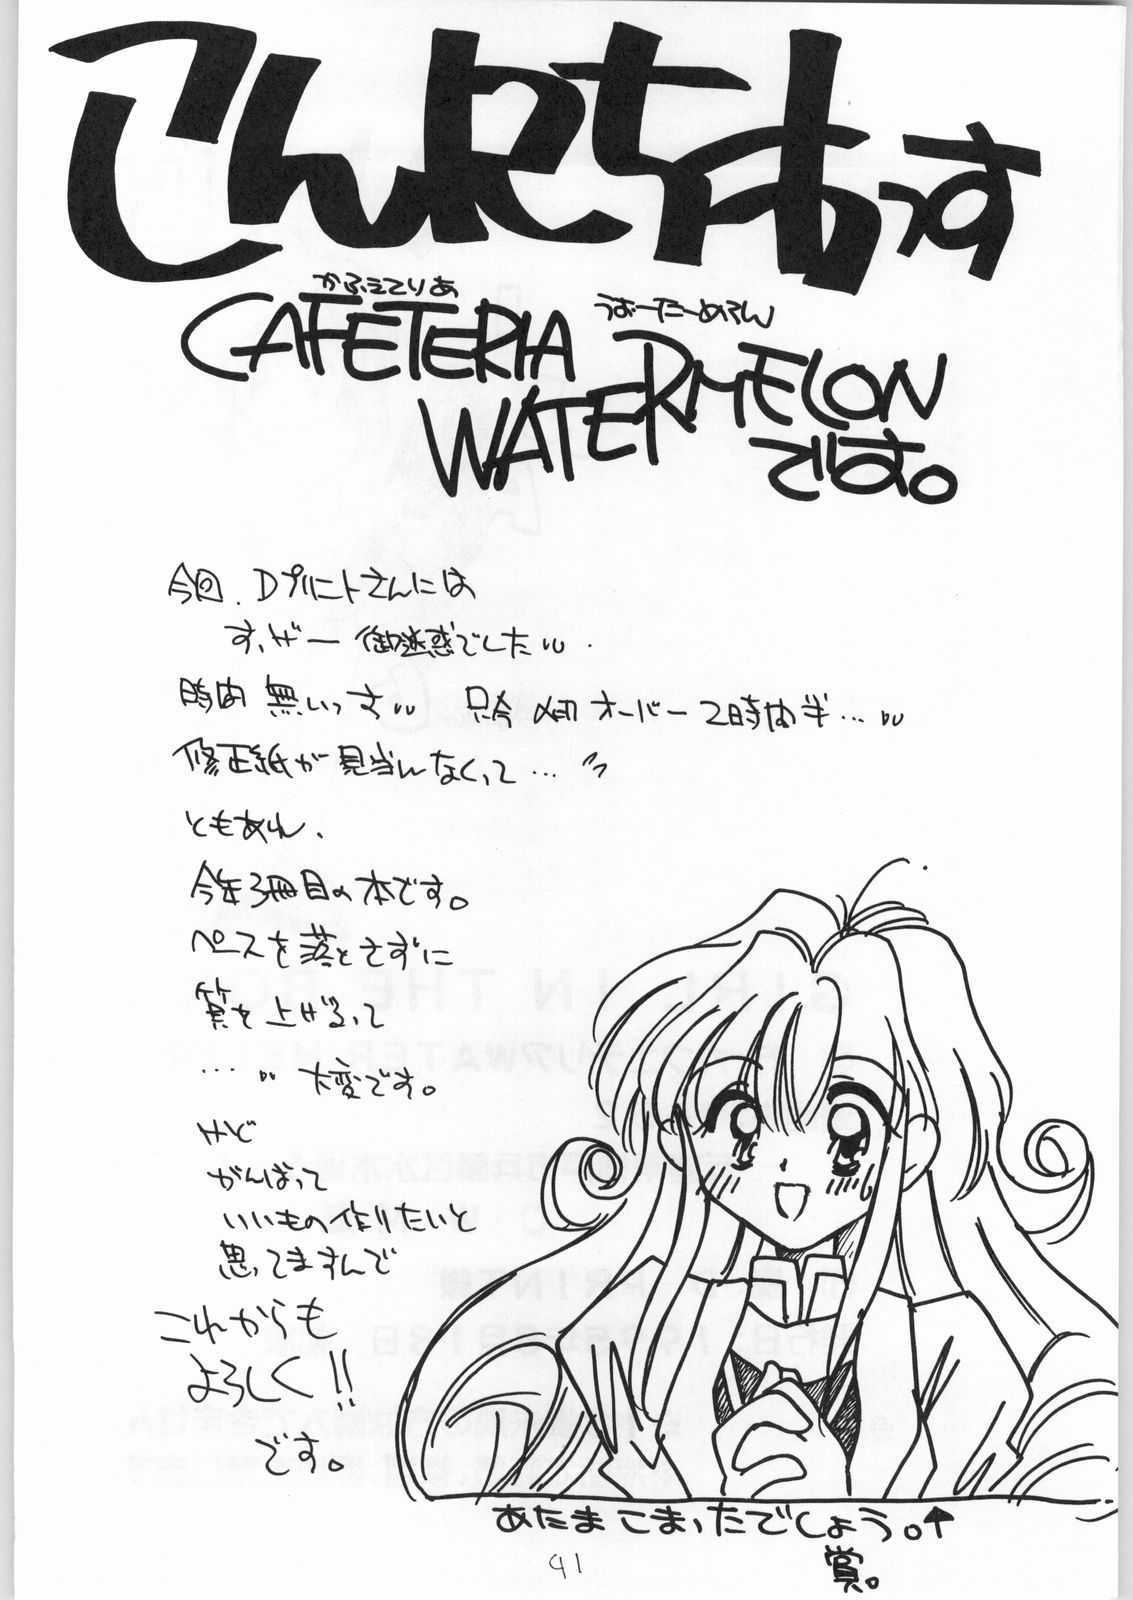 [Various] Girl in the Box 2 (Cafeteria Watermelon) [カフェテリアWATERMELON] GIRL IN THE BOX 2